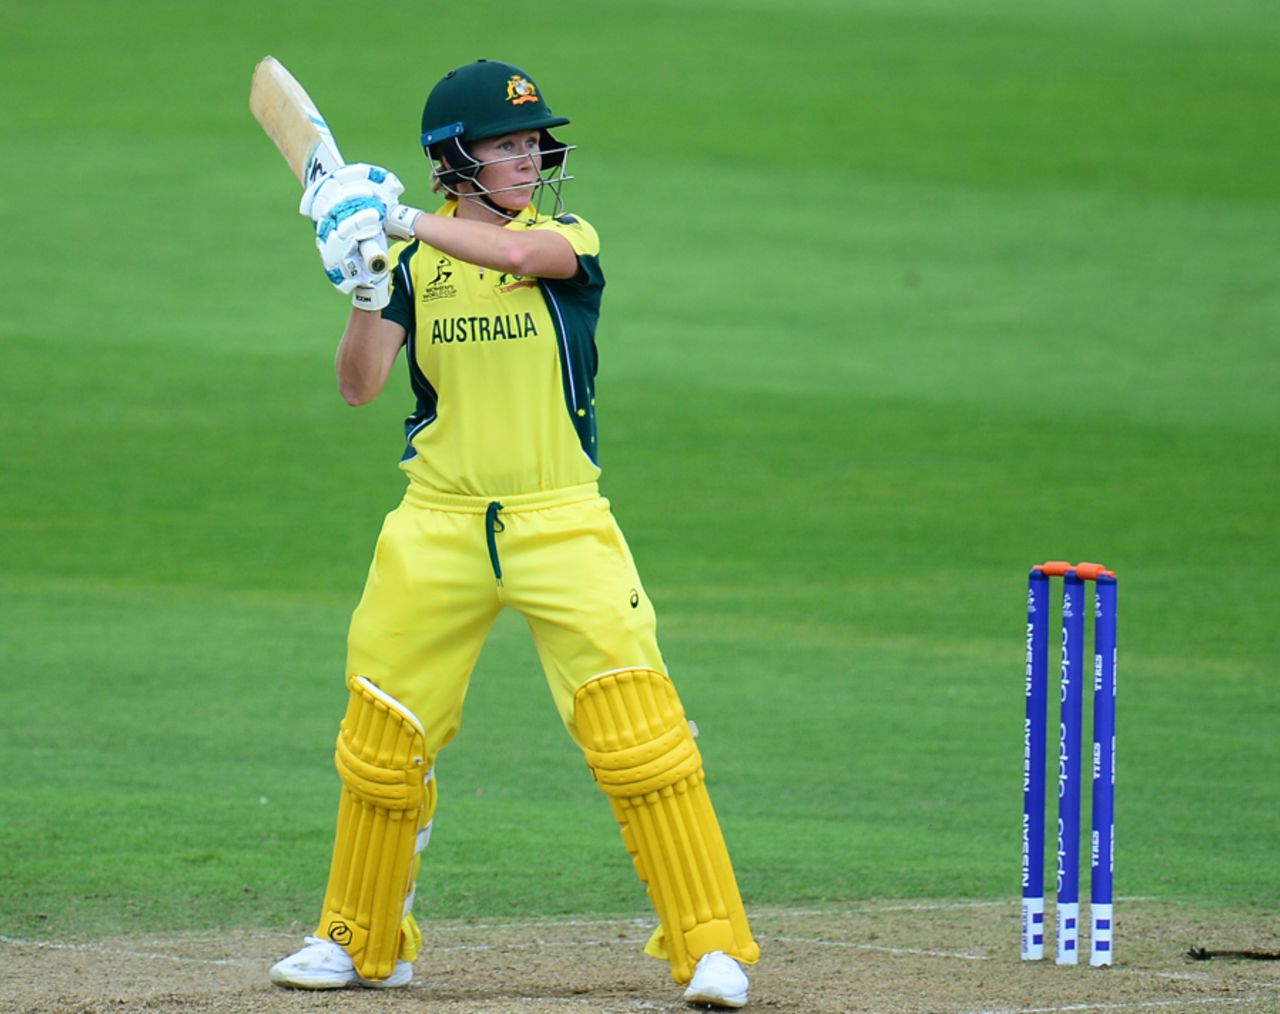 Beth Mooney flays one over point, West Indies v Australia, Women's World Cup, Taunton, June 26, 2017